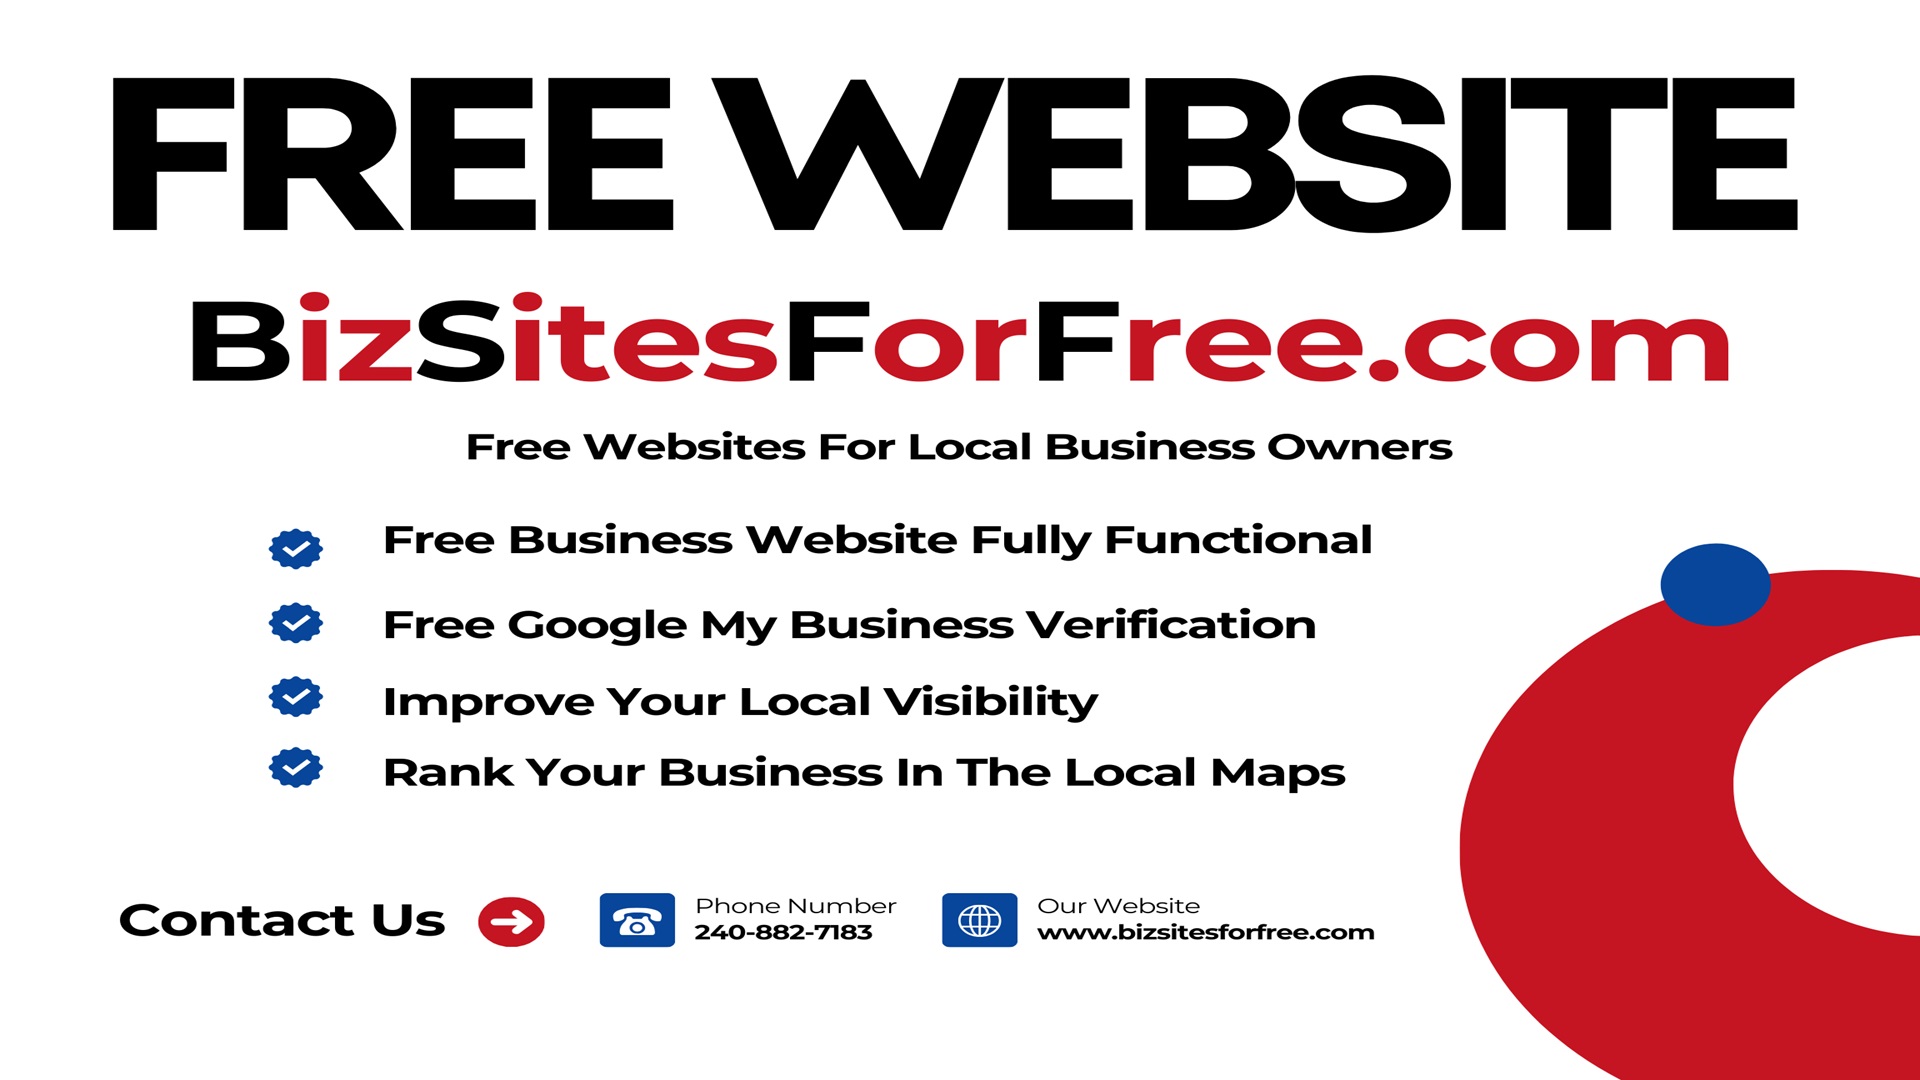 Milford CT Marketing Offers Free Websites to Local Service Businesses